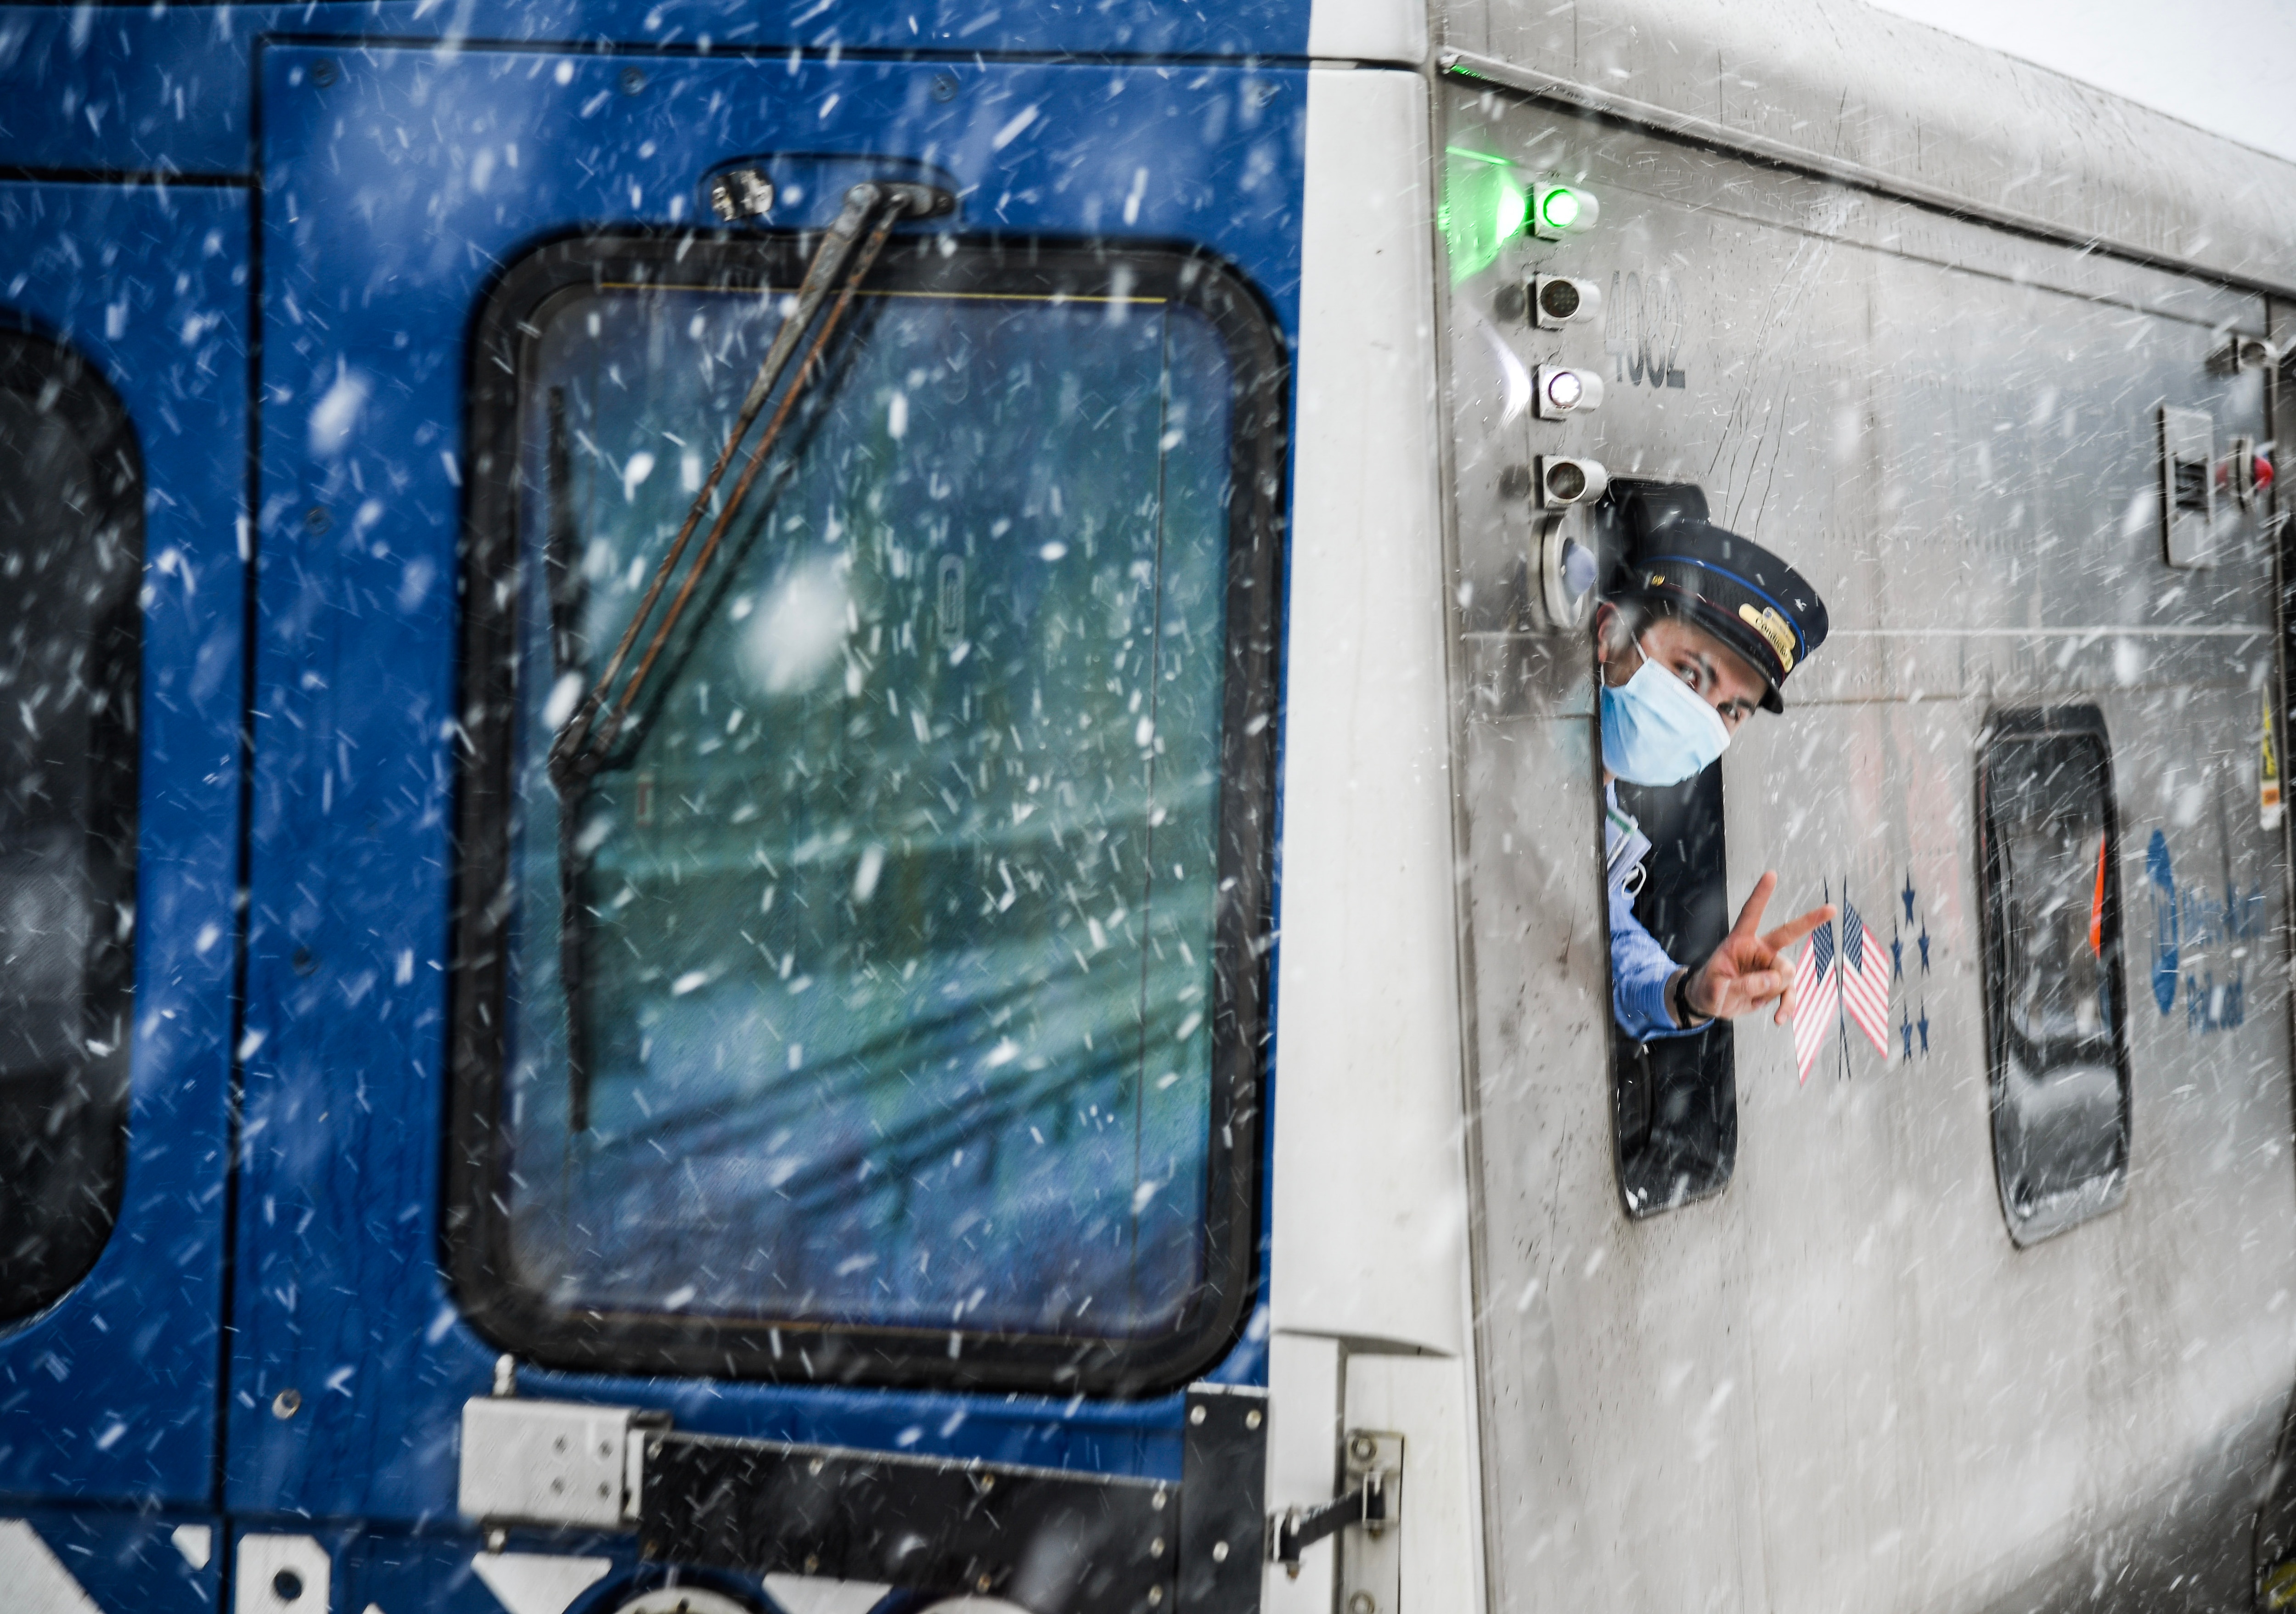 an mta employee on a train during a snowstorm